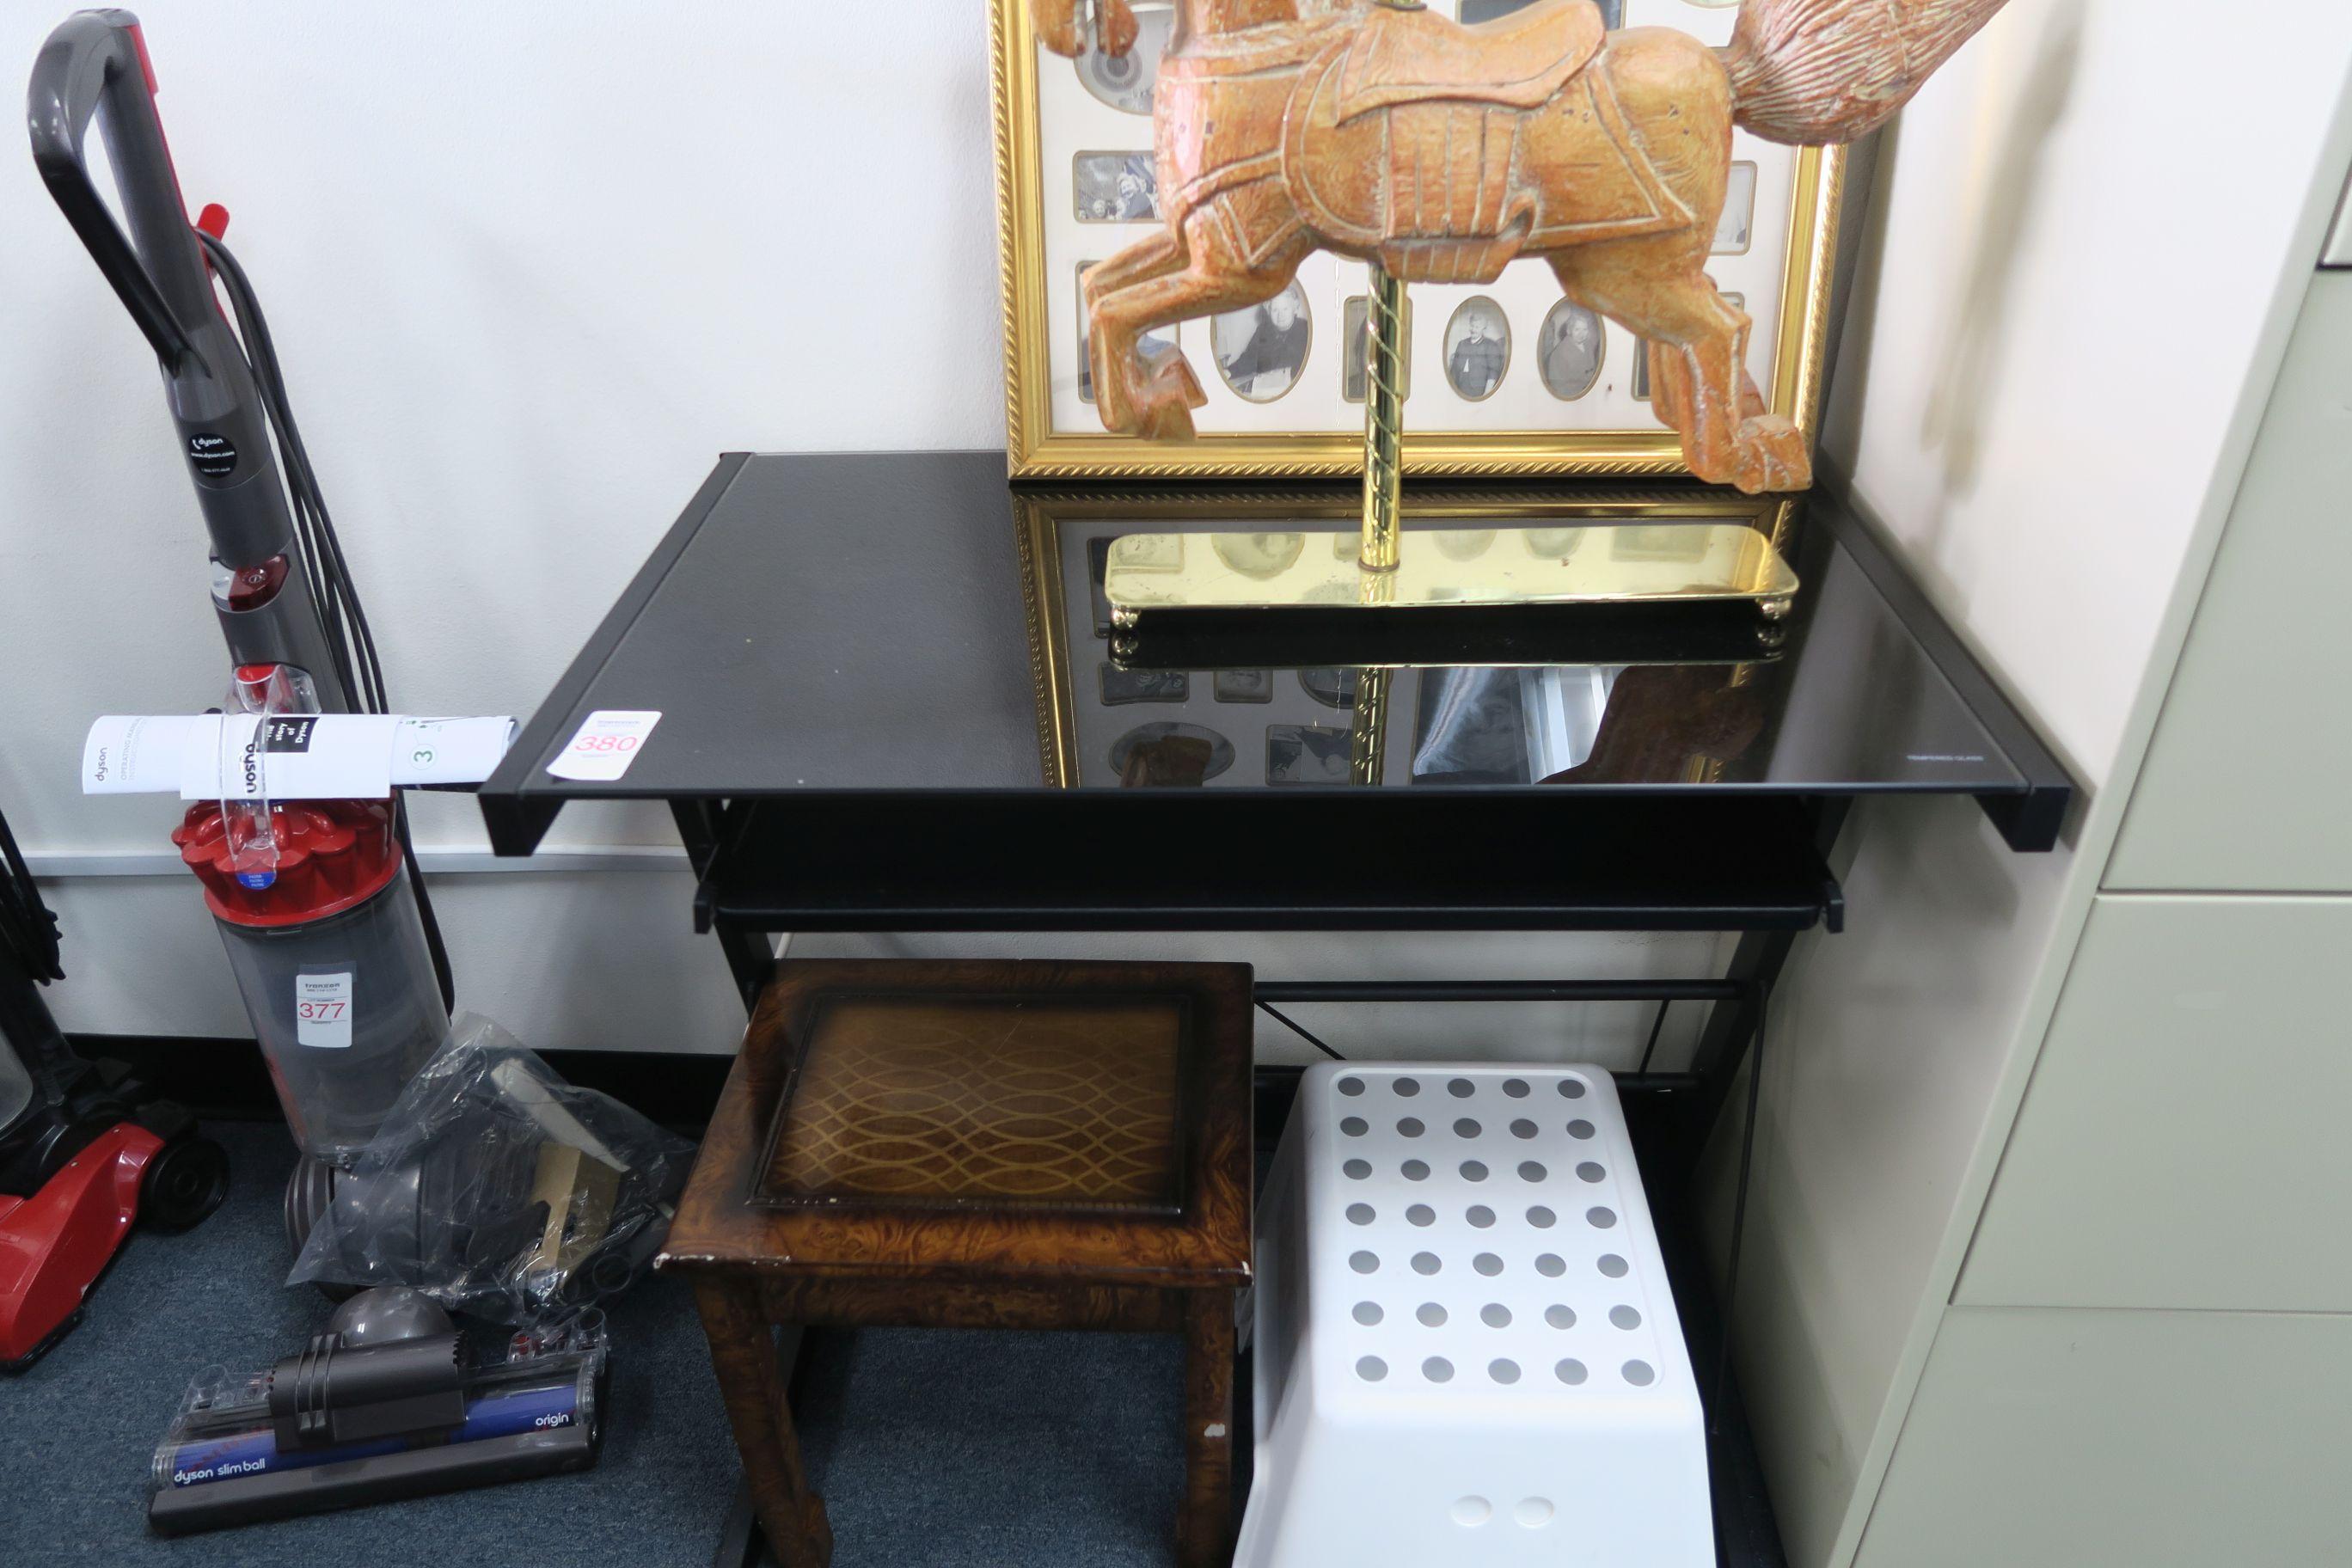 Lot Contents of Table and Top of File Cabinets - Pictures, Decorative Items, etc.